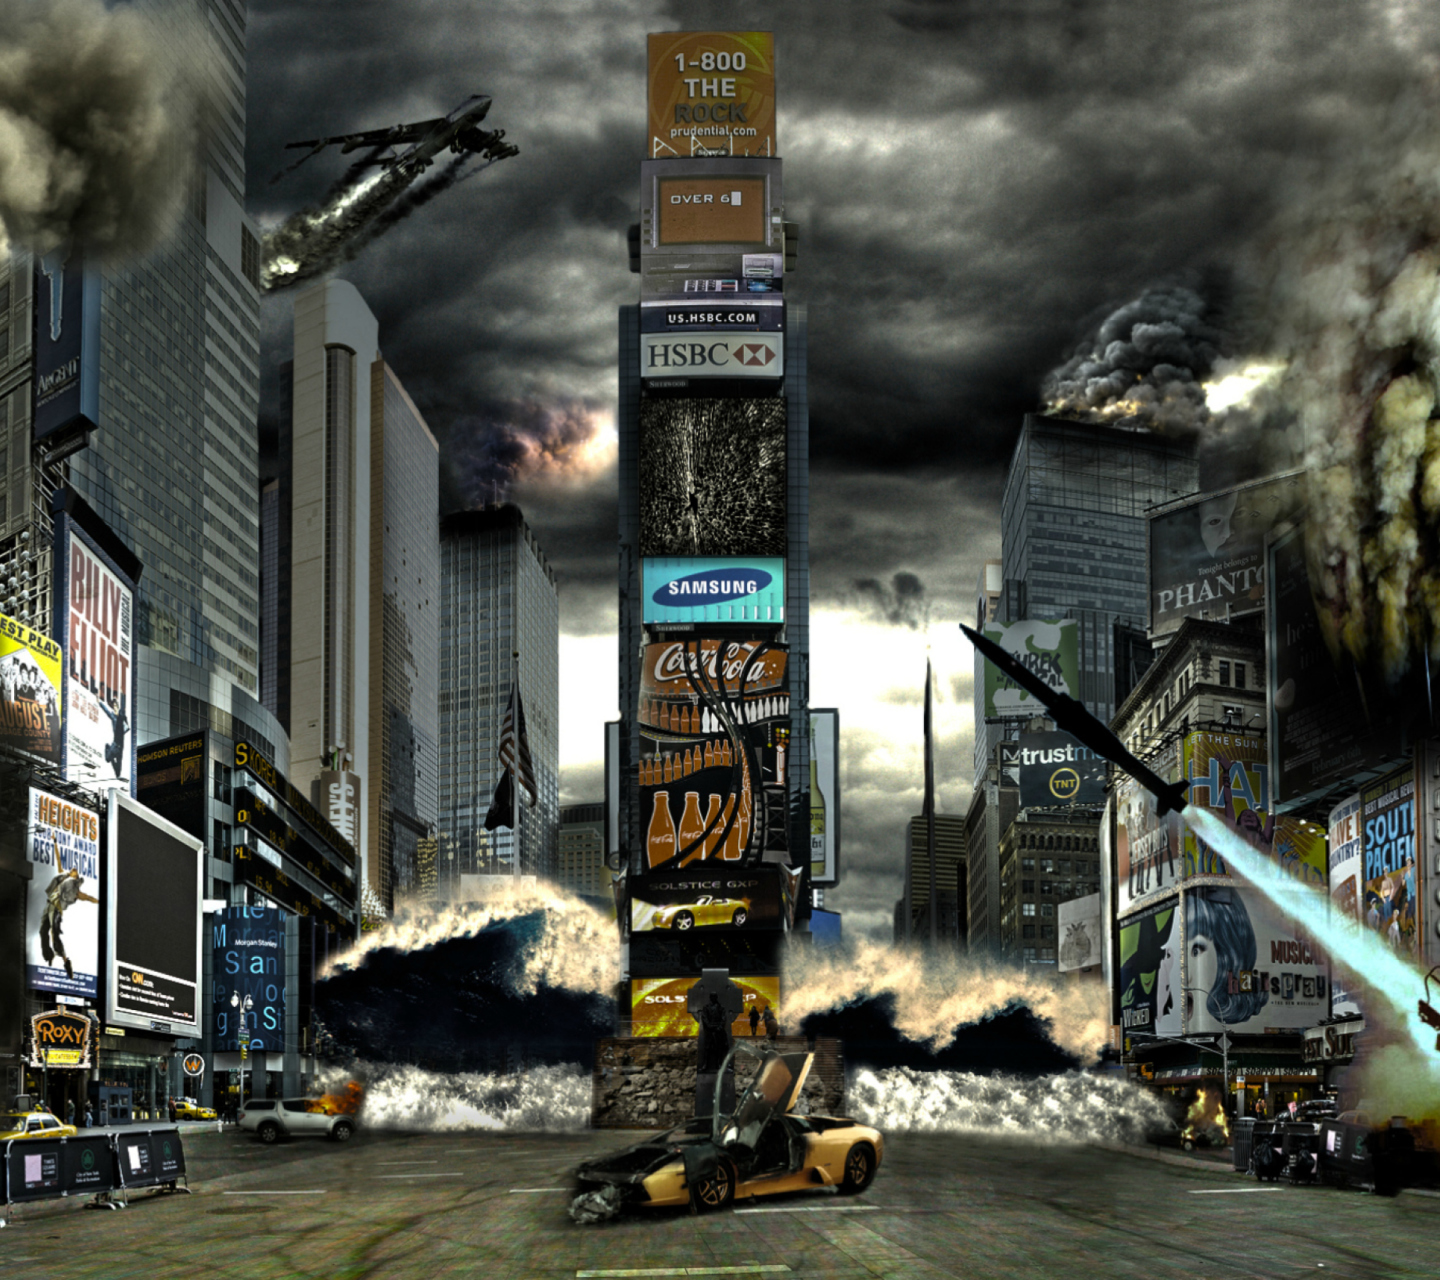 Times Square Disaster wallpaper 1440x1280